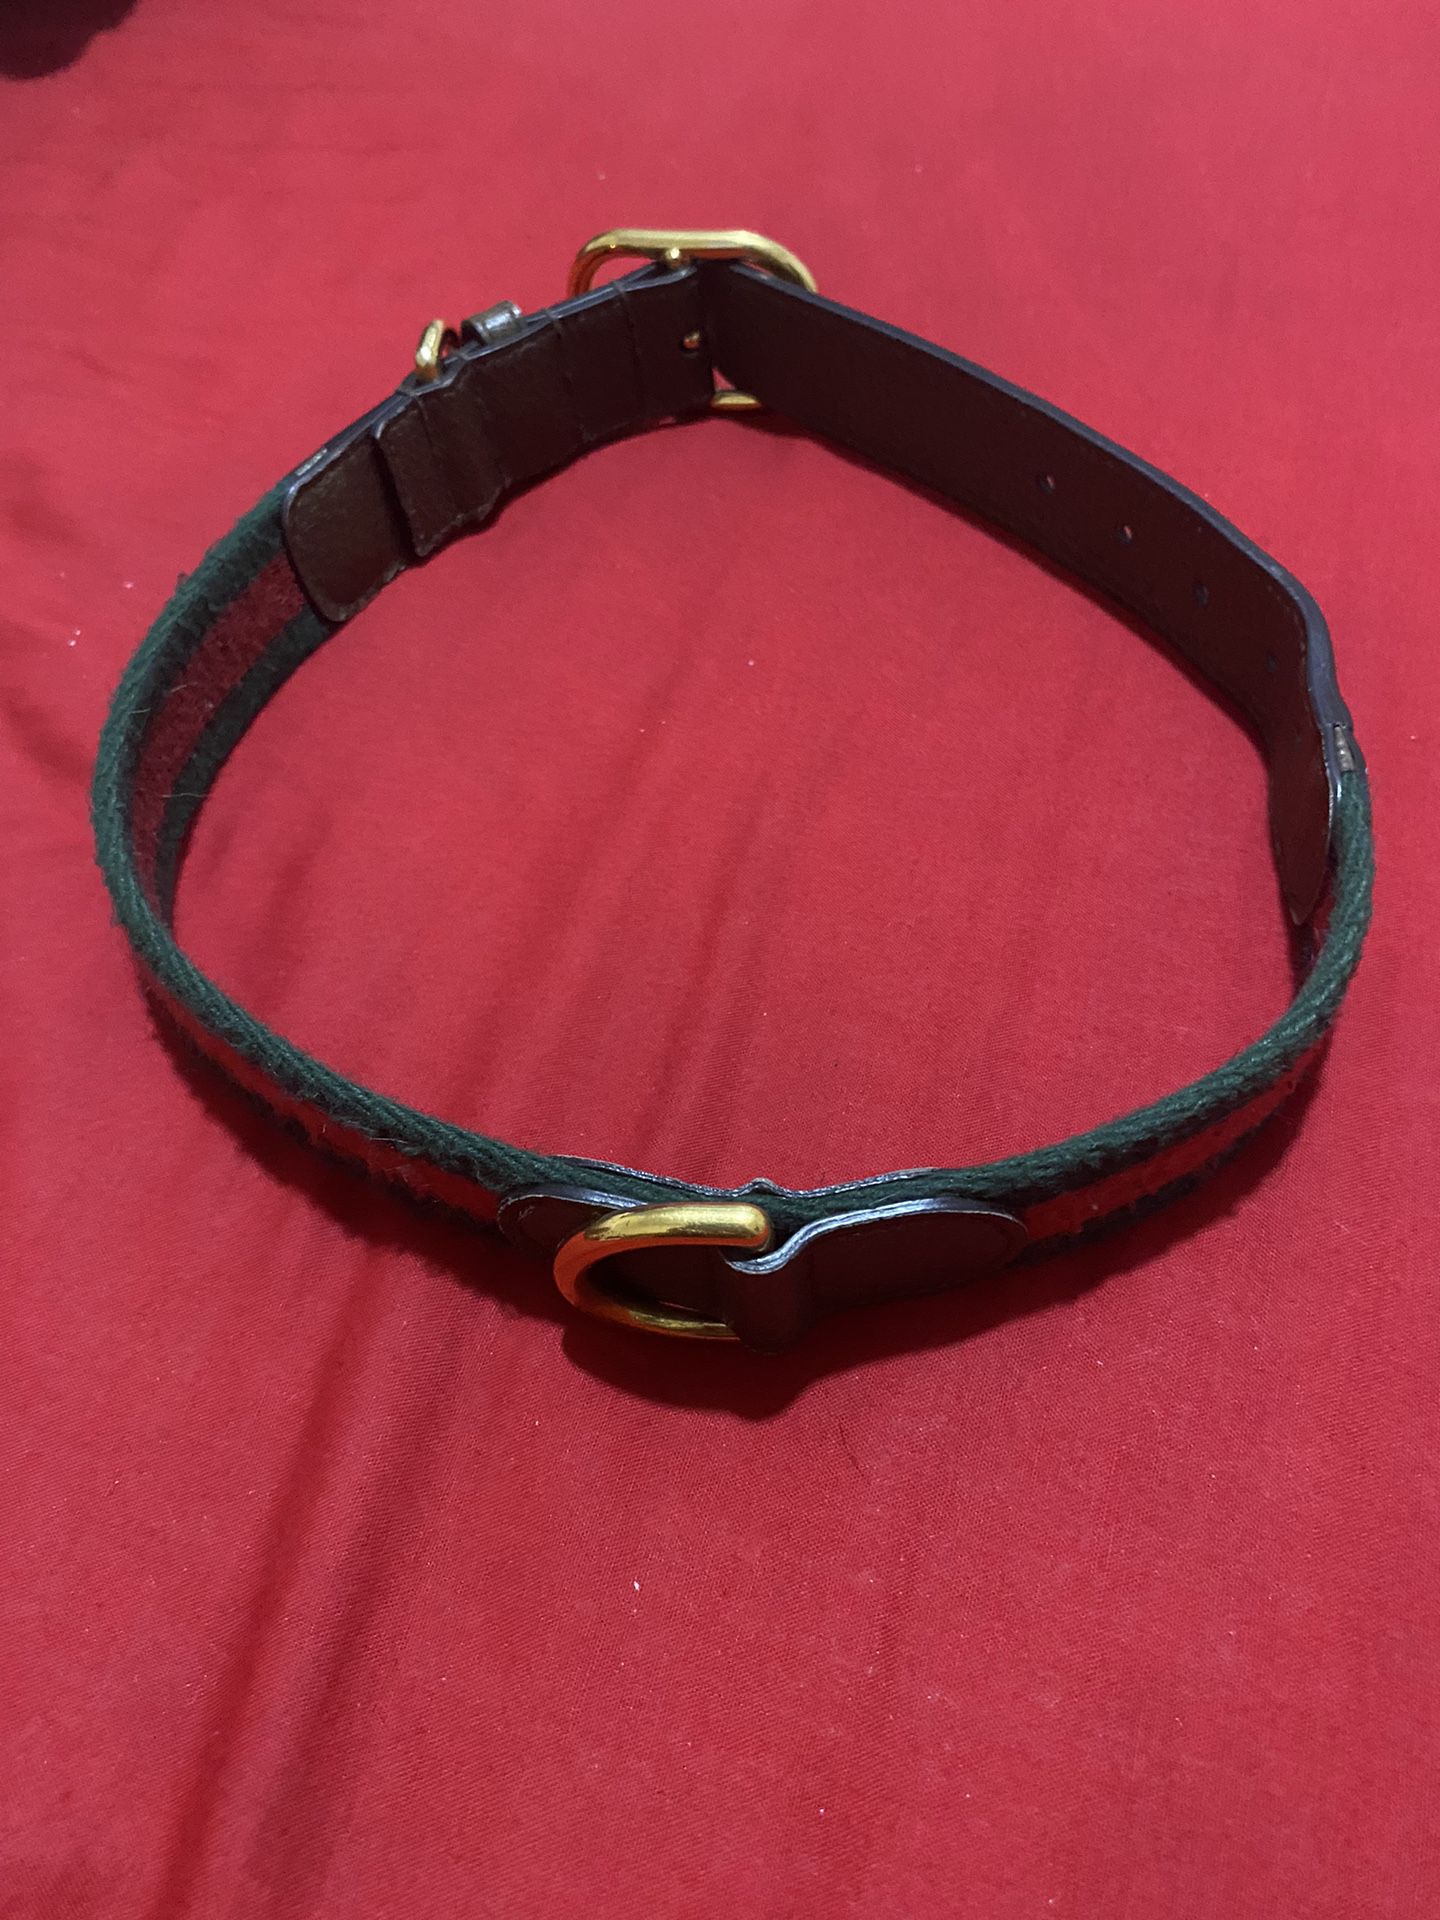 Authentic Gucci Adult Dog Collar 